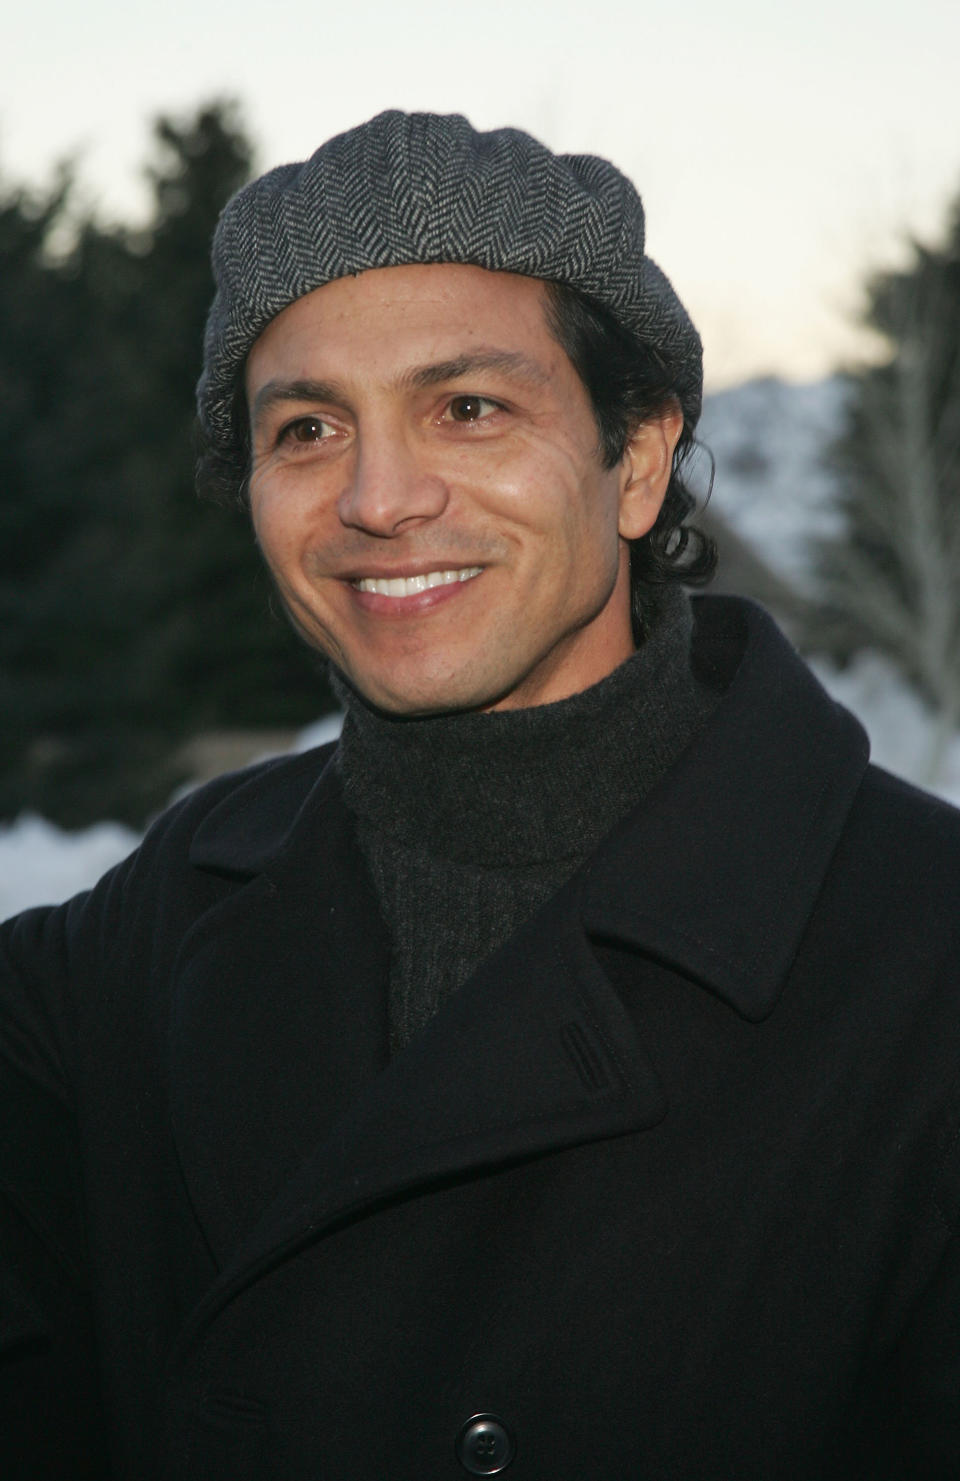 The actor wears a turtleneck for the premiere of the film "Thumbsucker" in January 2005.